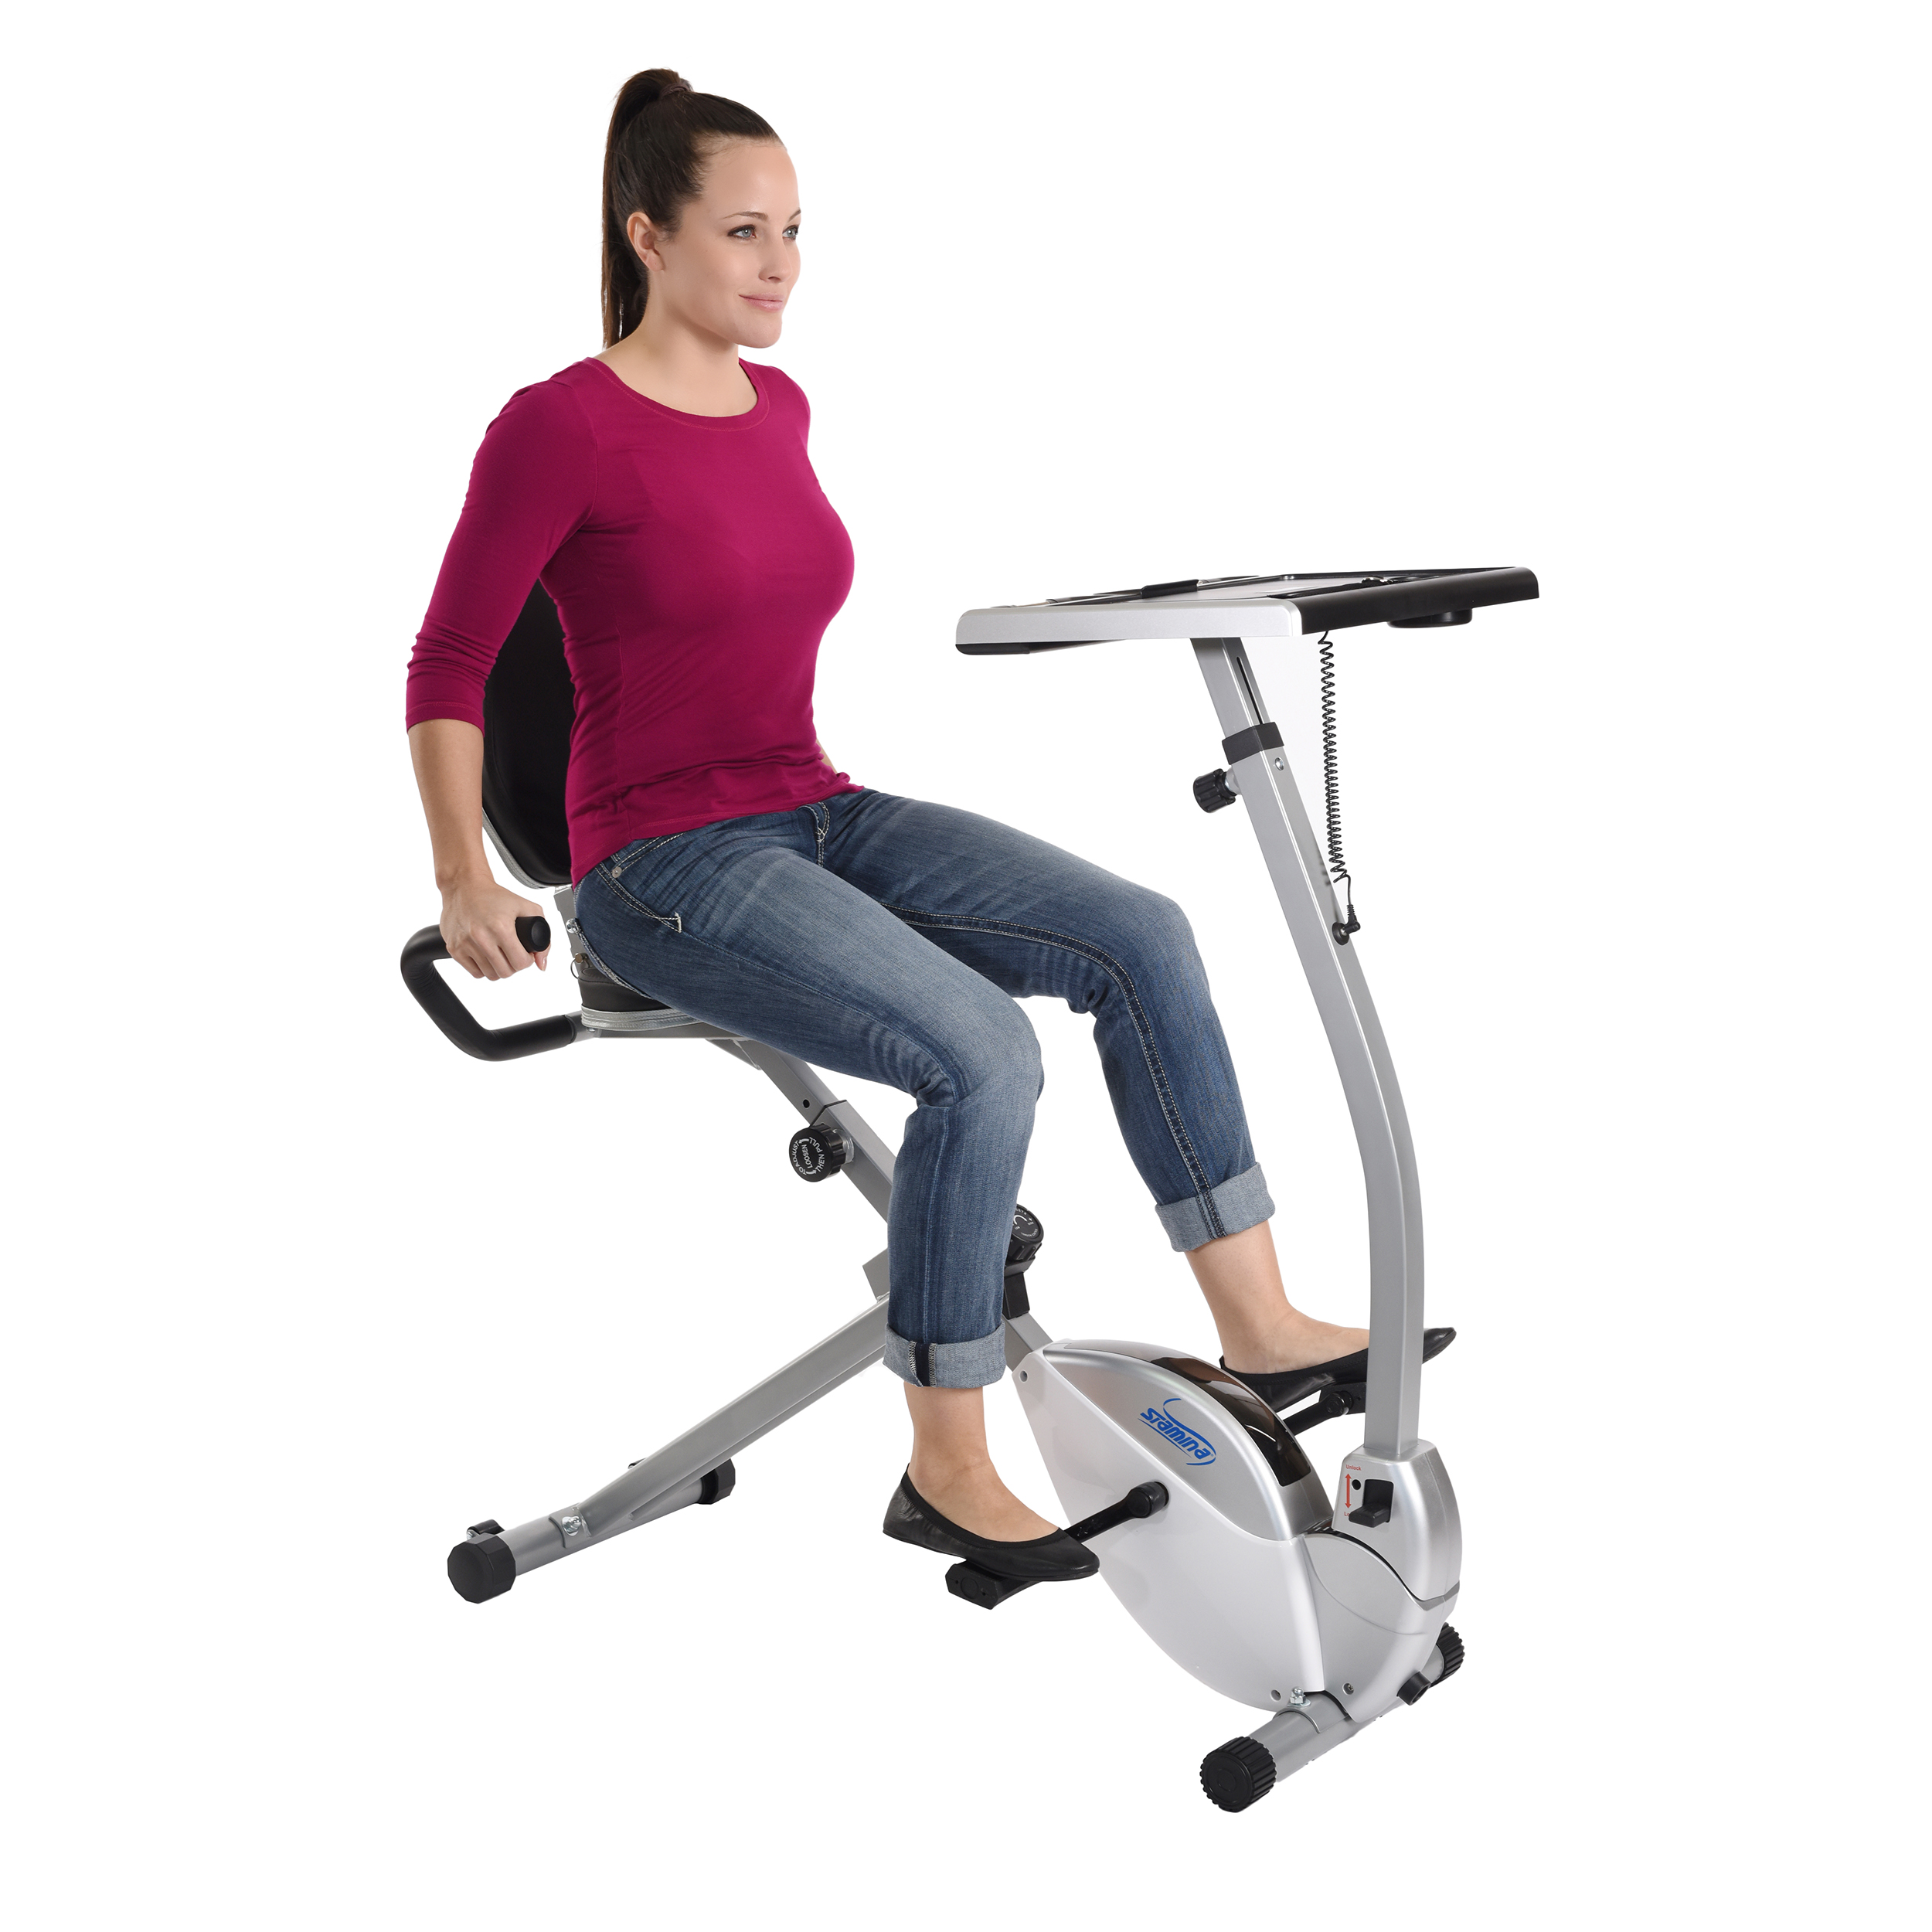 standing cycle exercise